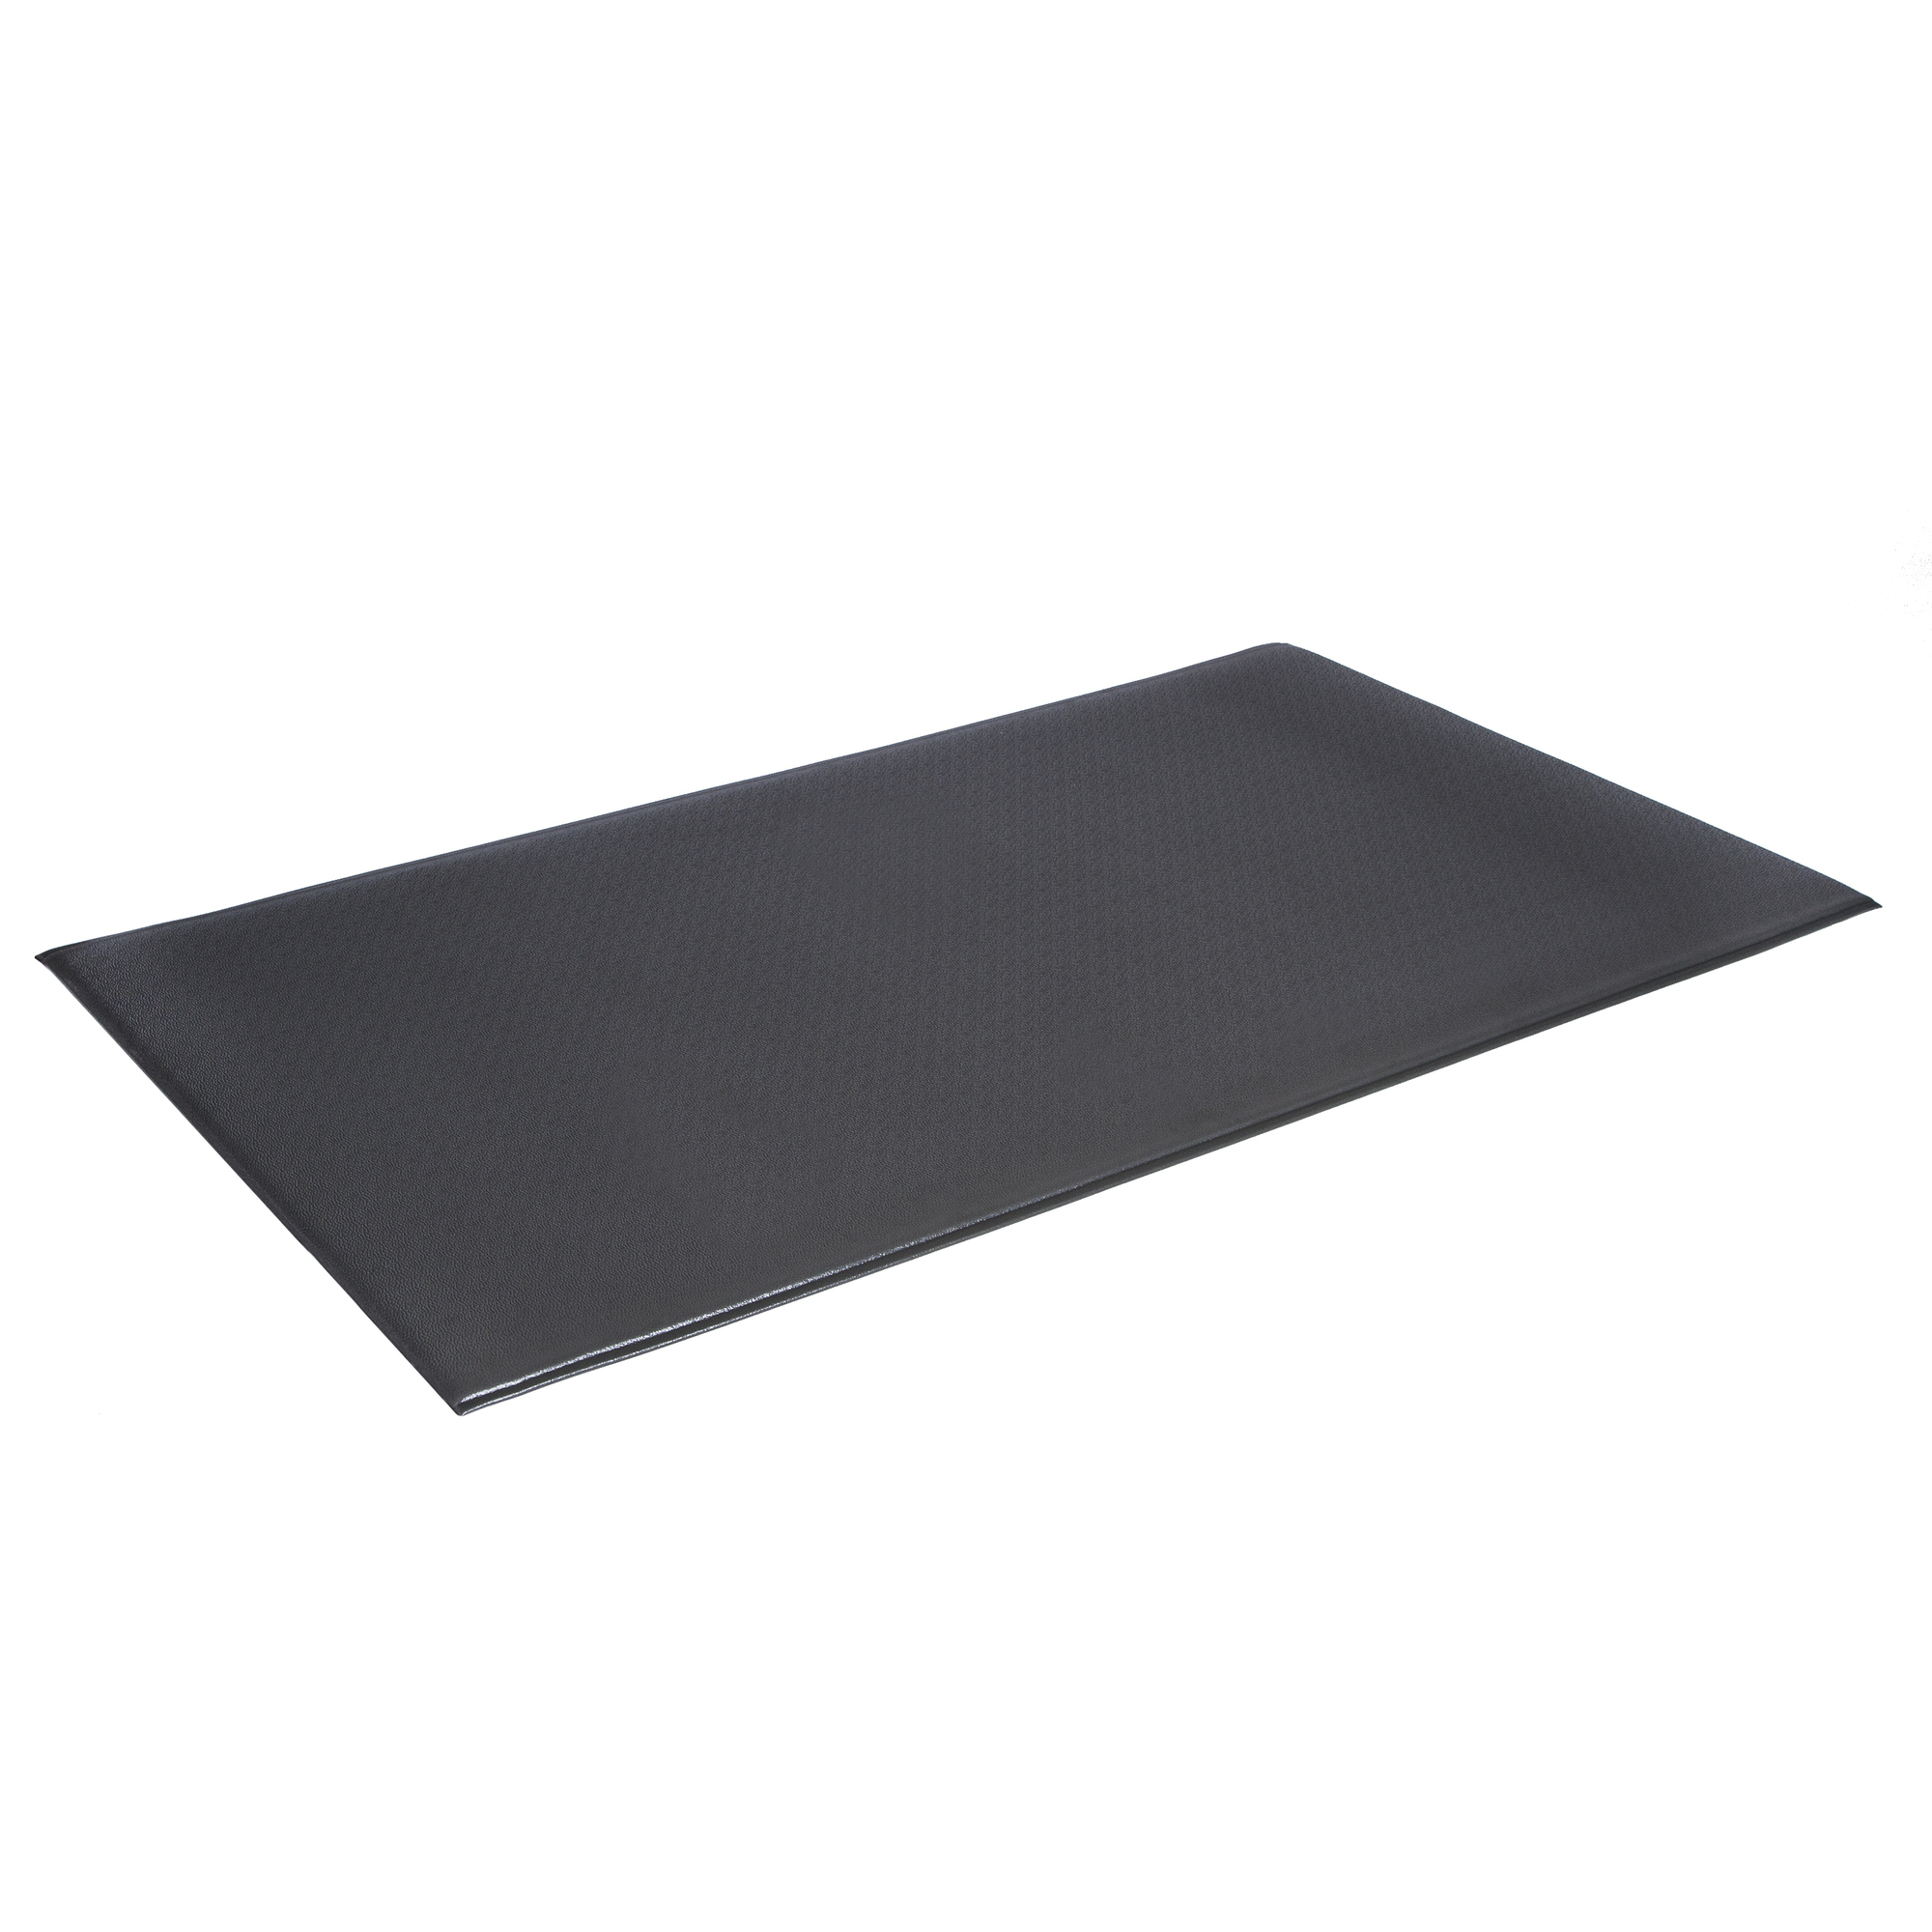 Crown Matting Technologies, Wear-Bond Comfort-King Pebble-Surface 3ft.x12ft. Gray, Width 36 in, Length 144 in, Thickness 9/16 in, Model WB Z312GP